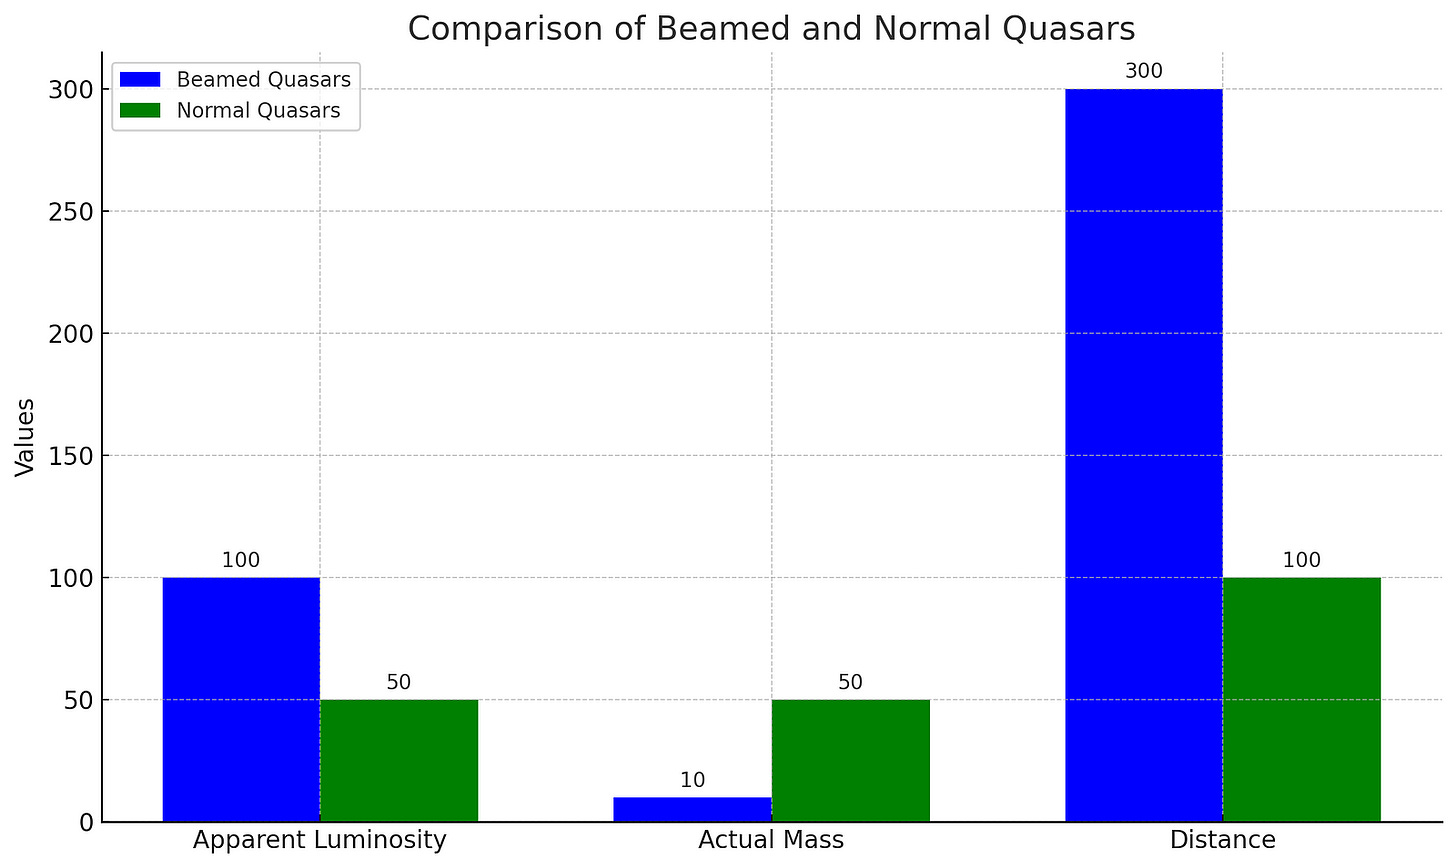 Bar graph showing a comparison between beamed quasars and normal quasars in terms of apparent luminosity, actual mass, and distance. Beamed quasars have higher apparent luminosity and distance but much lower actual mass compared to normal quasars.